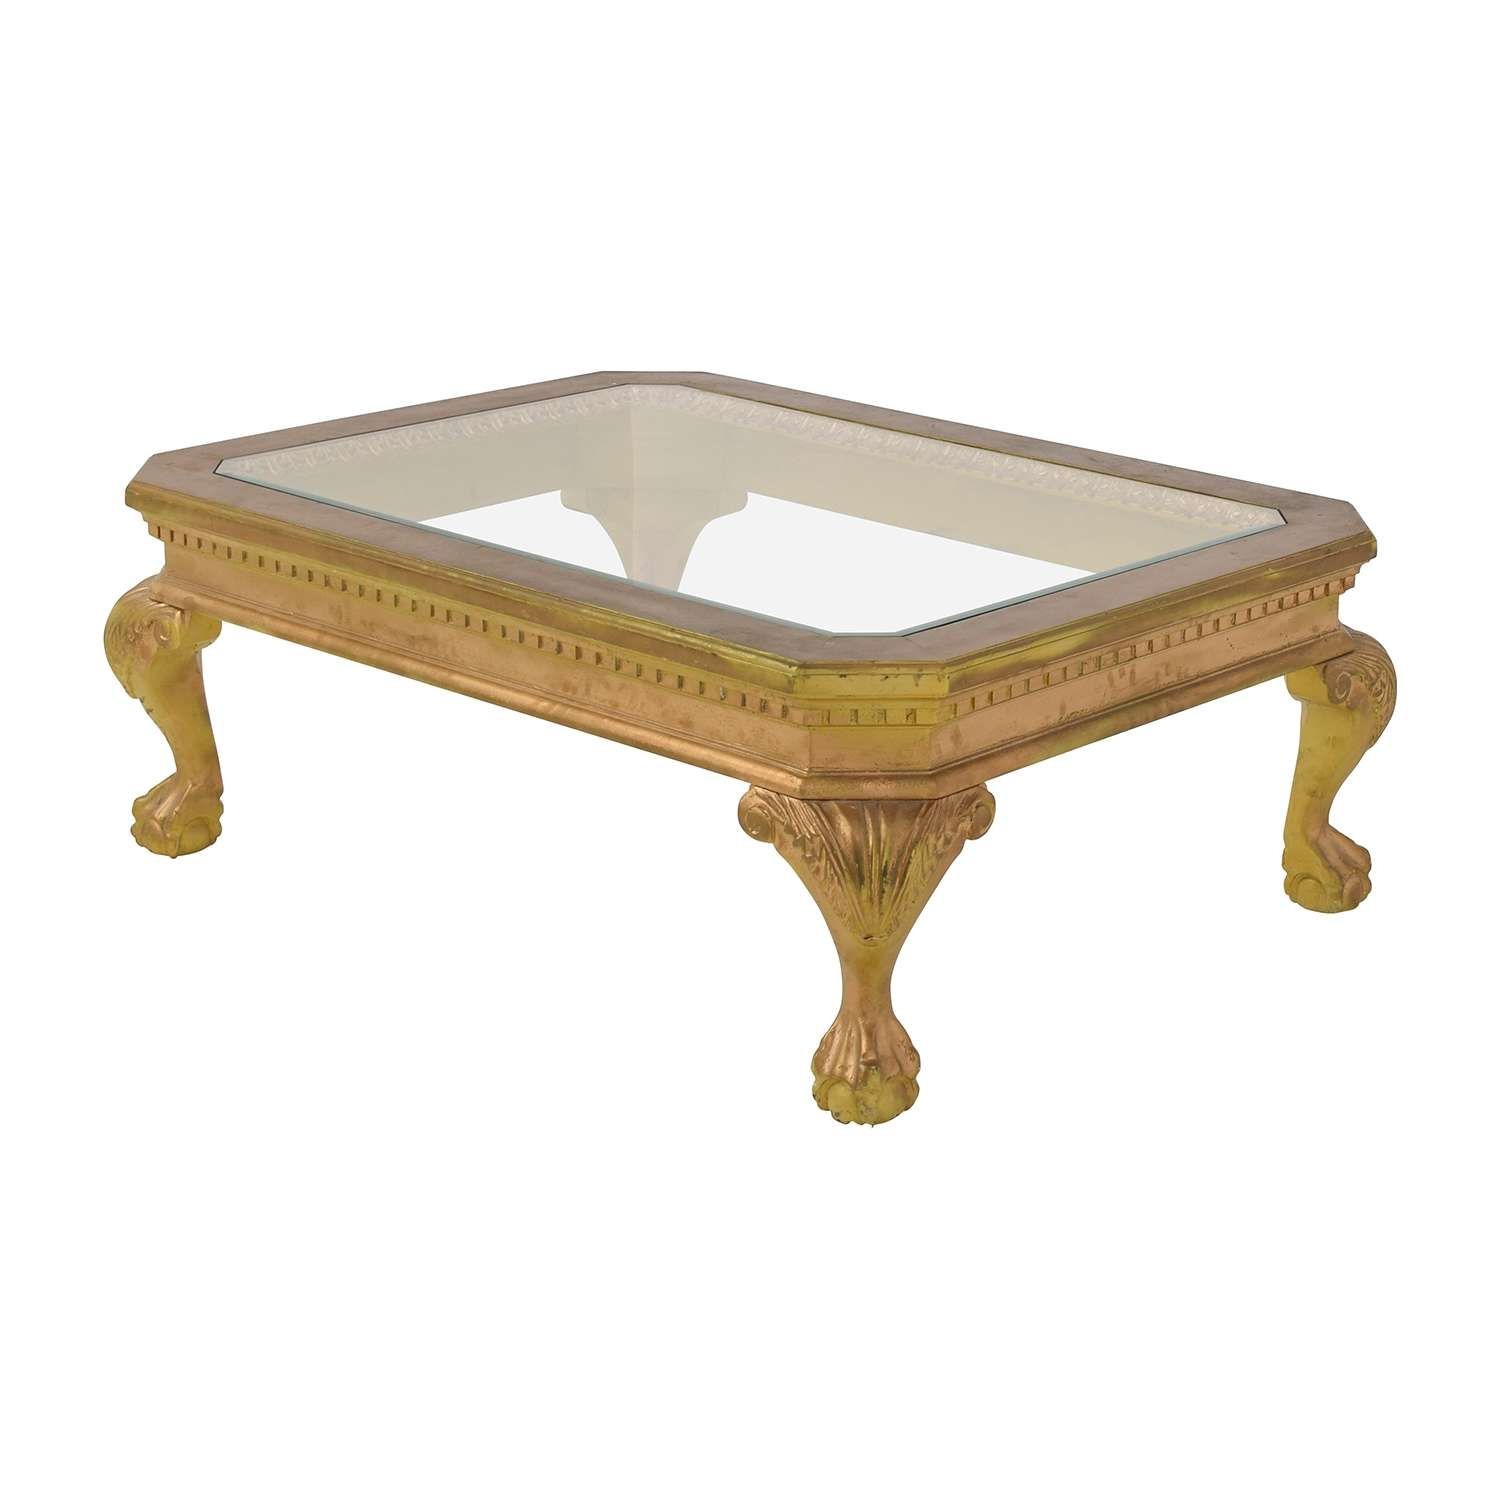 [%newest Antique Glass Coffee Tables Within 75% Off – Distressed Wood Antique Gold And Glass Coffee Table / Tables|75% Off – Distressed Wood Antique Gold And Glass Coffee Table / Tables In Current Antique Glass Coffee Tables%] (View 14 of 20)